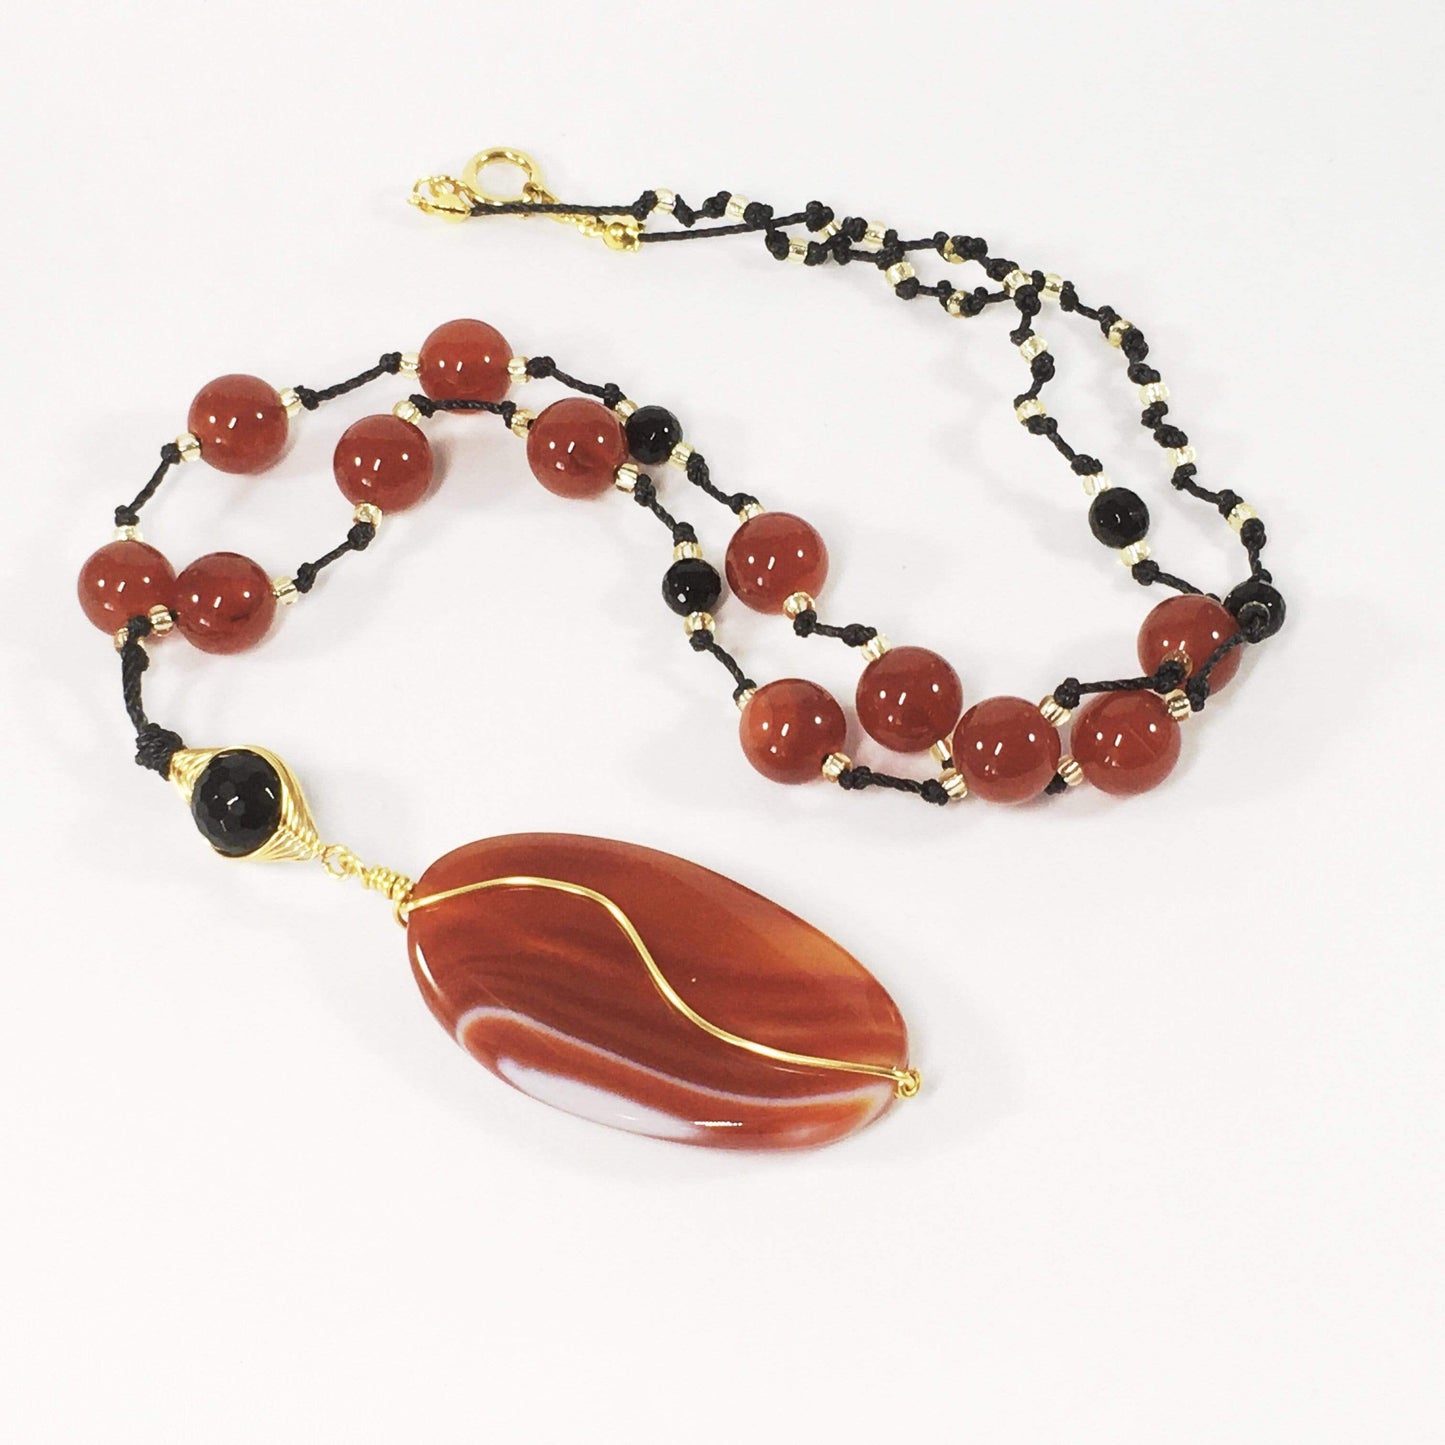 Handmade Coloured Agate Gemstone Knotted Pendant Necklace